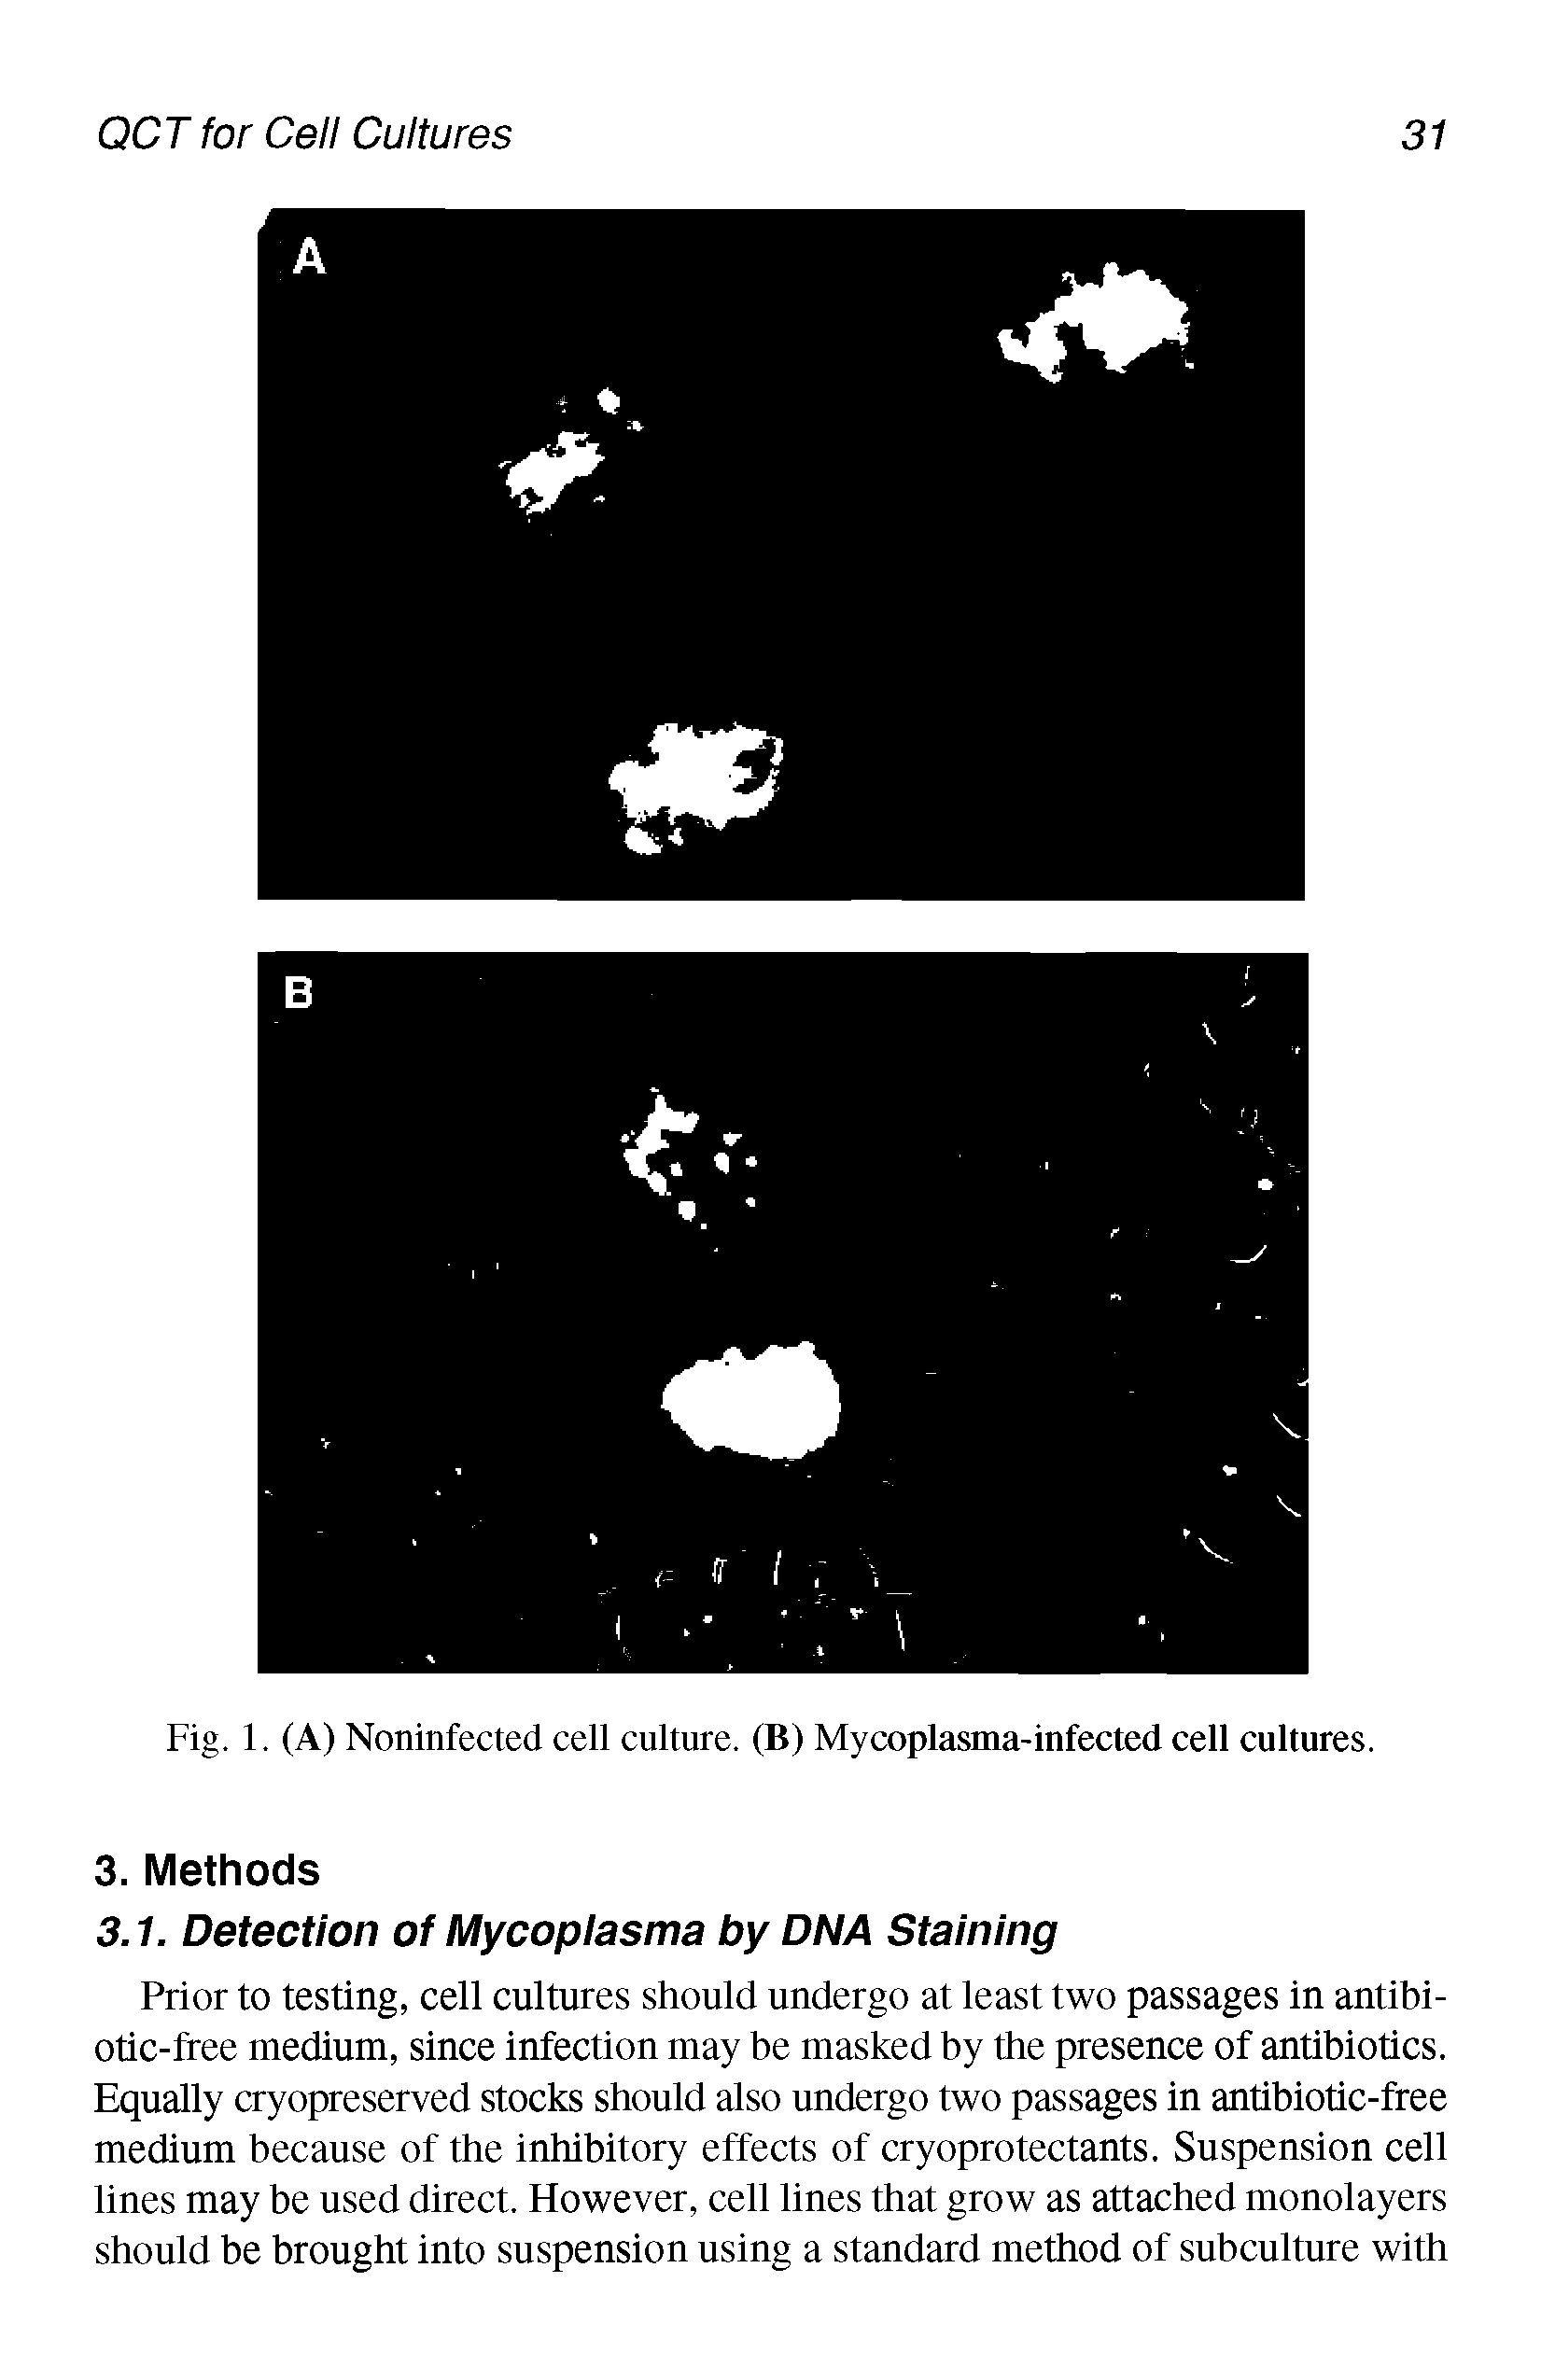 Fig. 1. (A) Noninfected cell culture. (B) Mycoplasma-infected cell cultures.